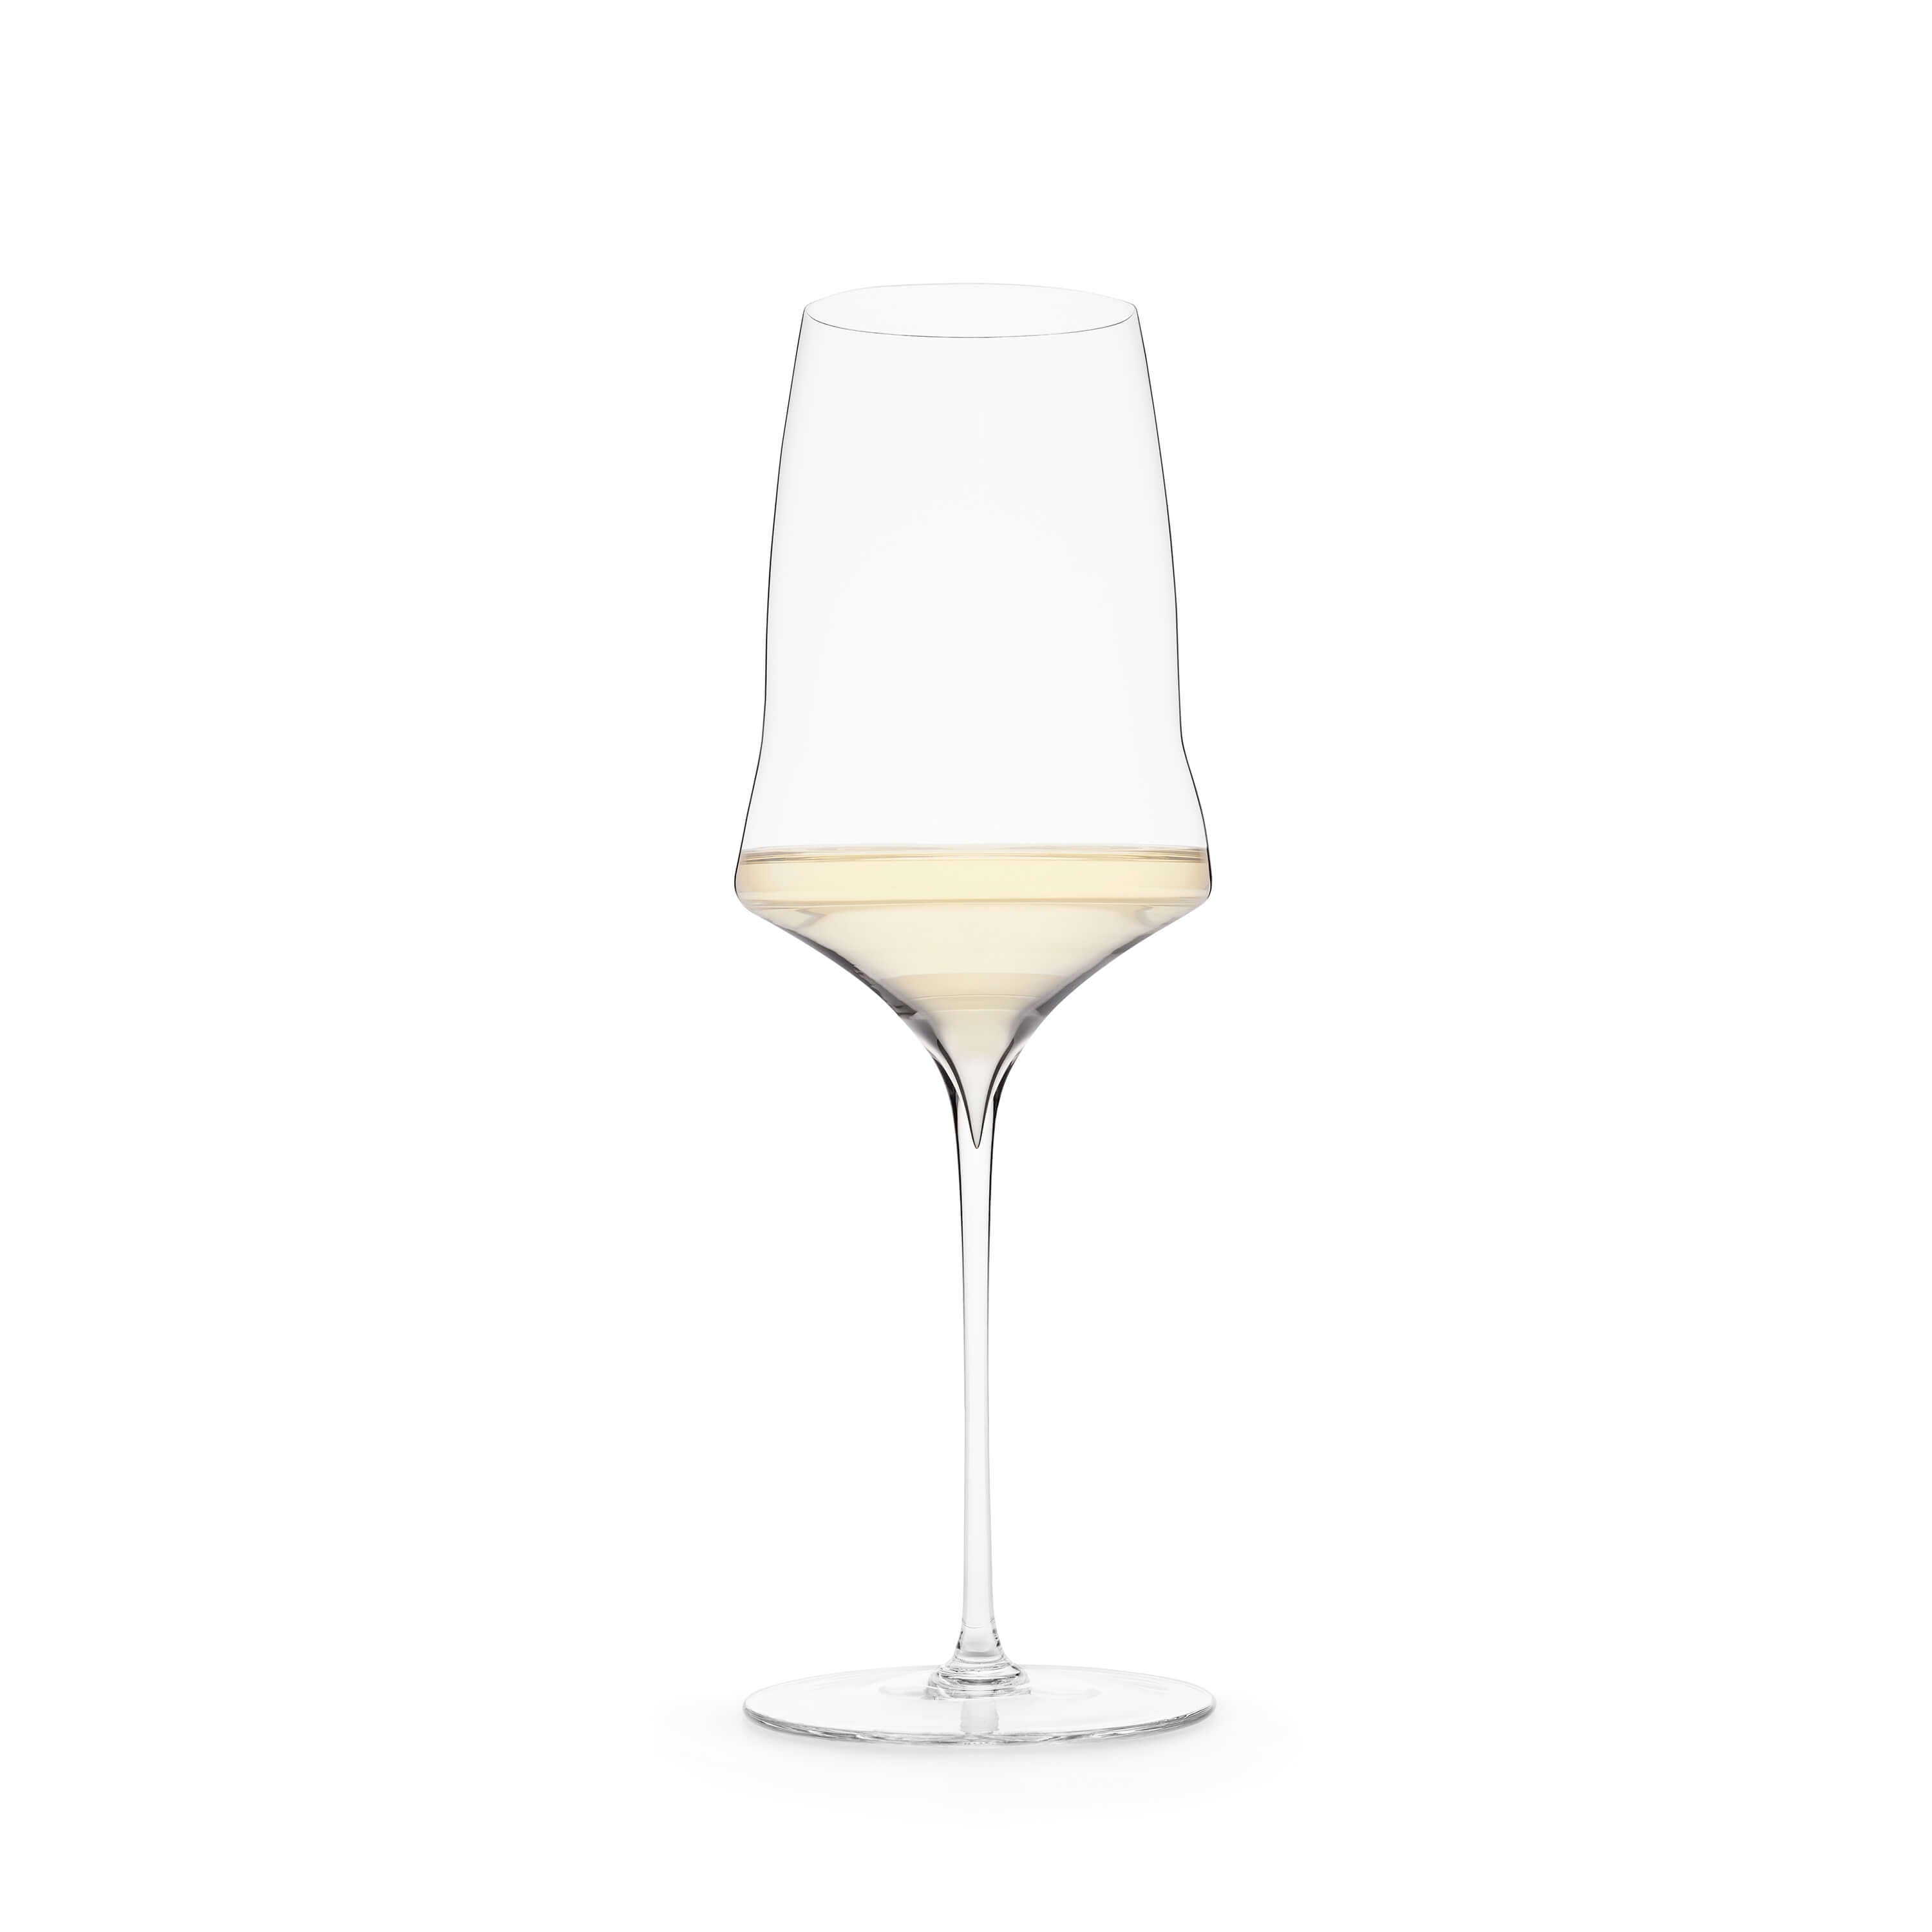 Single white wine glass filled with white wine by Josephinenhütte